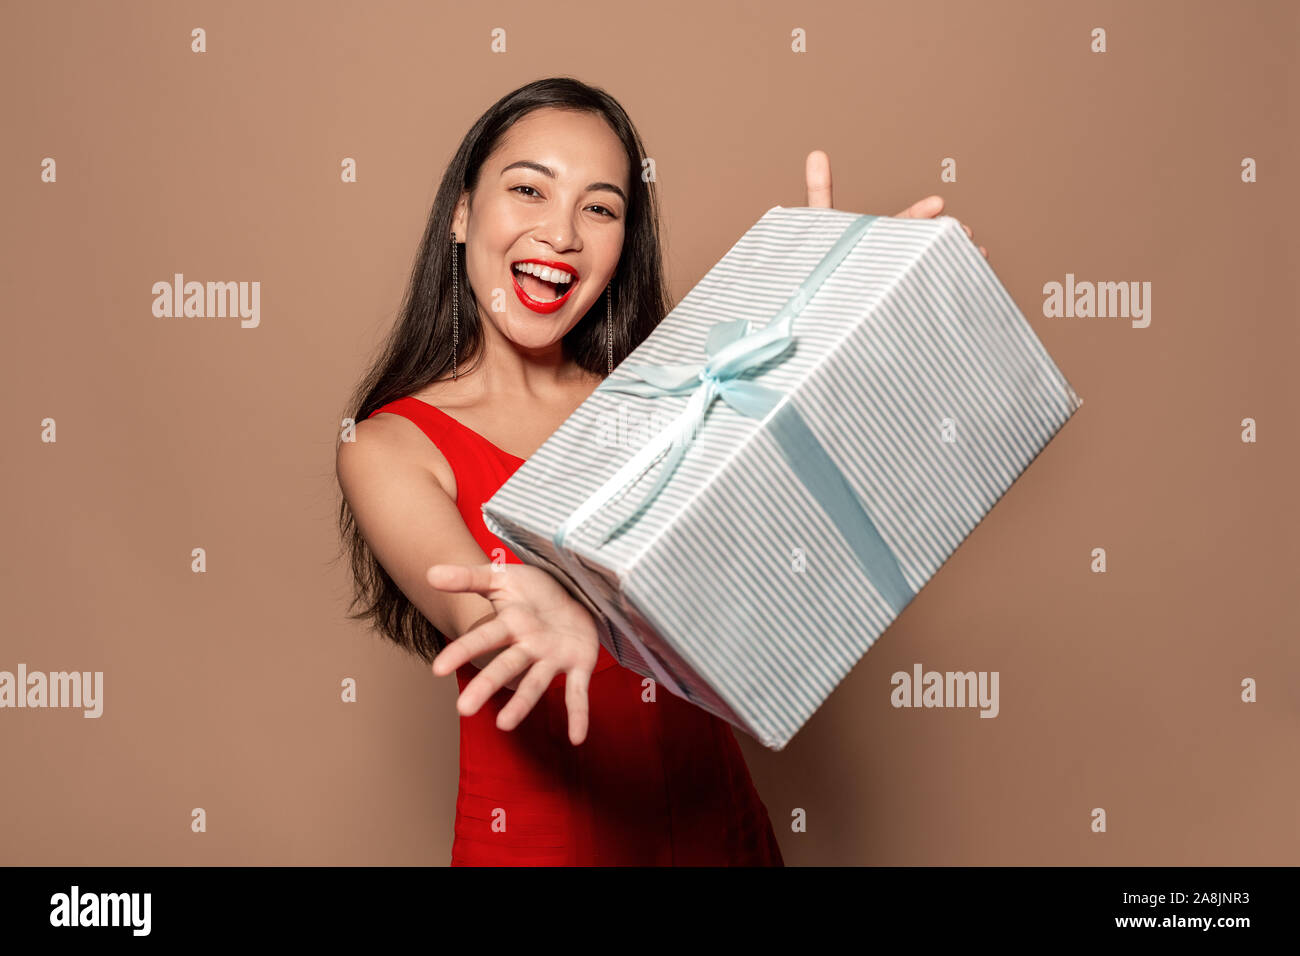 Freestyle. Young girl in dress standing isolated on brown giving present box to camera close-up smiling playful Stock Photo